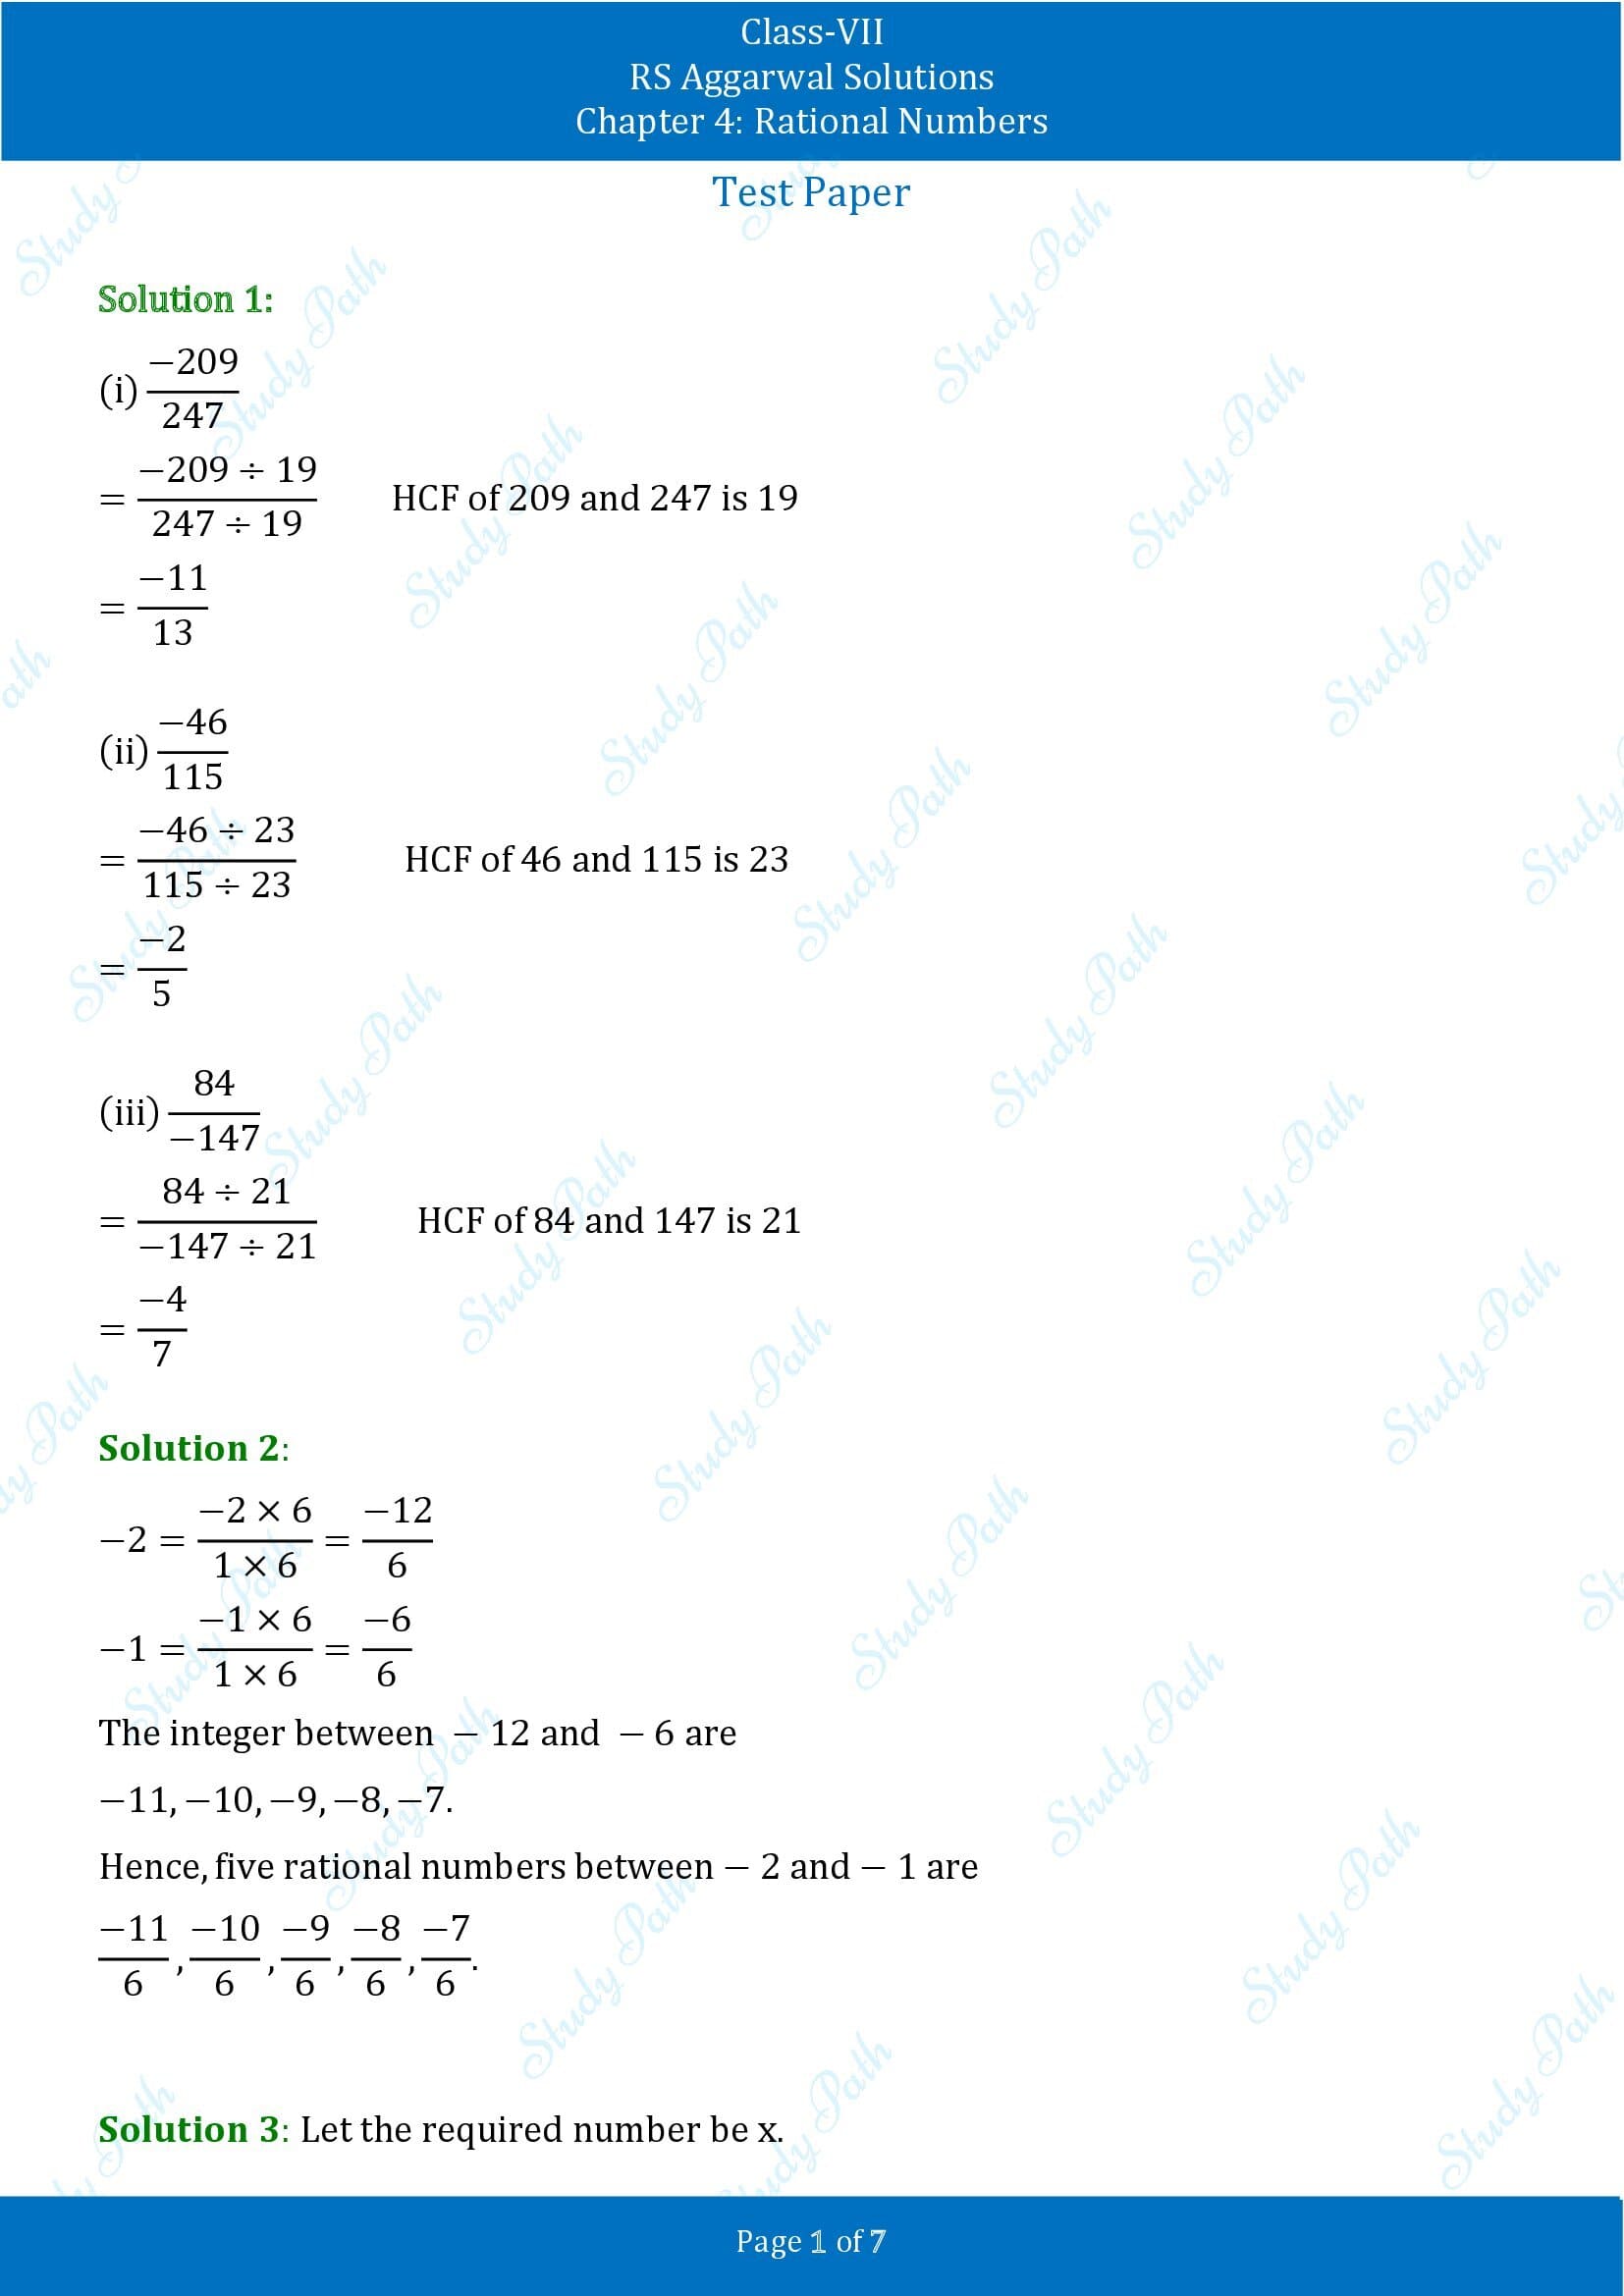 RS Aggarwal Solutions Class 7 Chapter 4 Rational Numbers Test Paper 00001